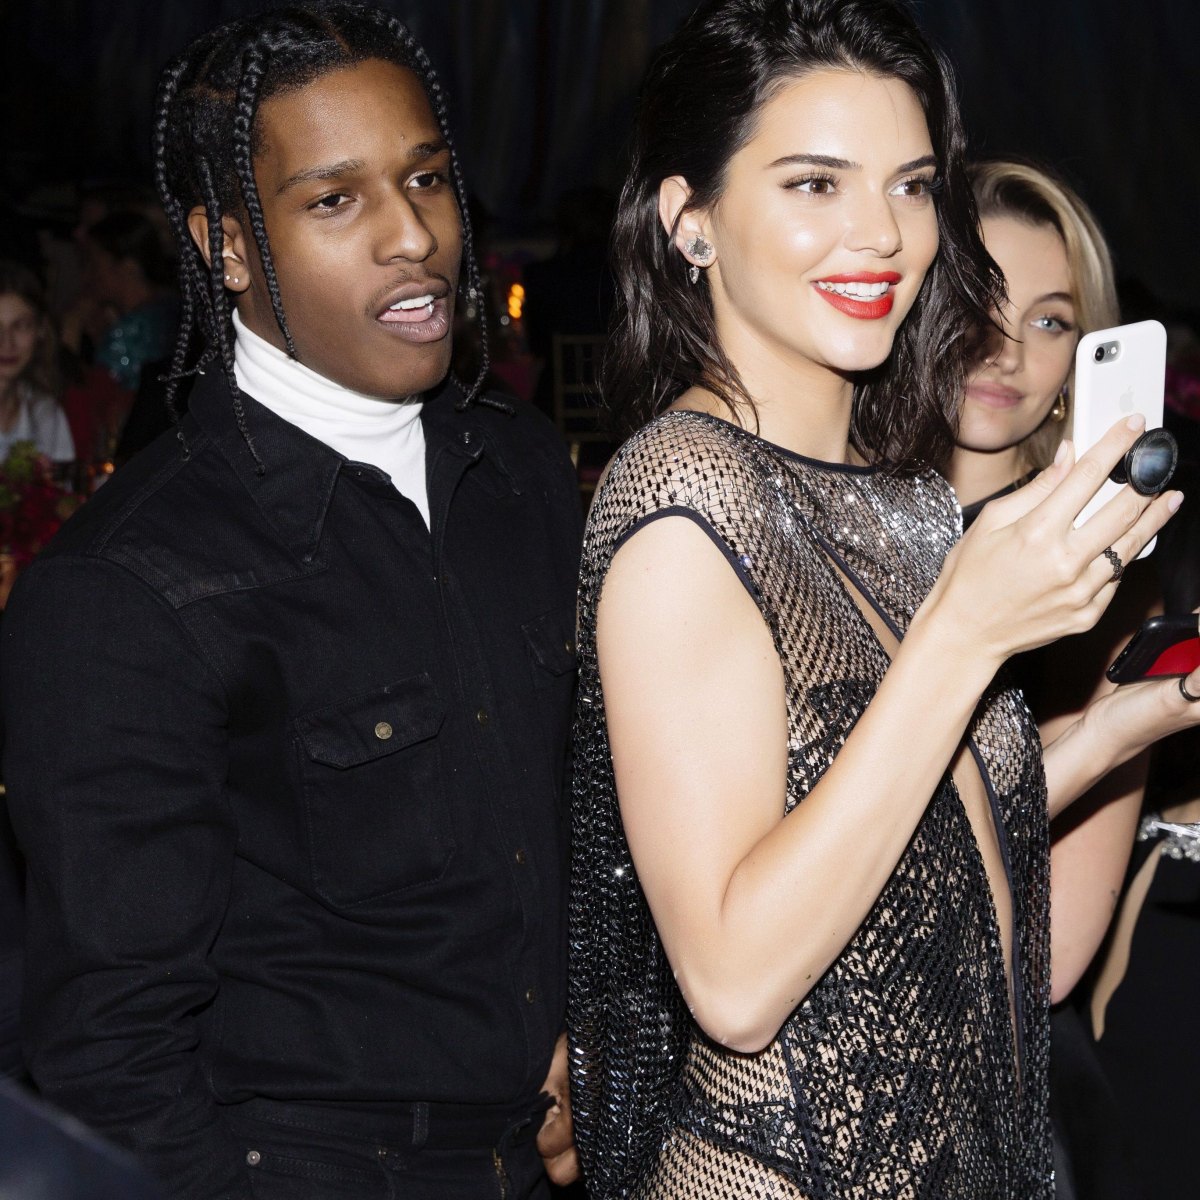 Kendall Jenner's dating history